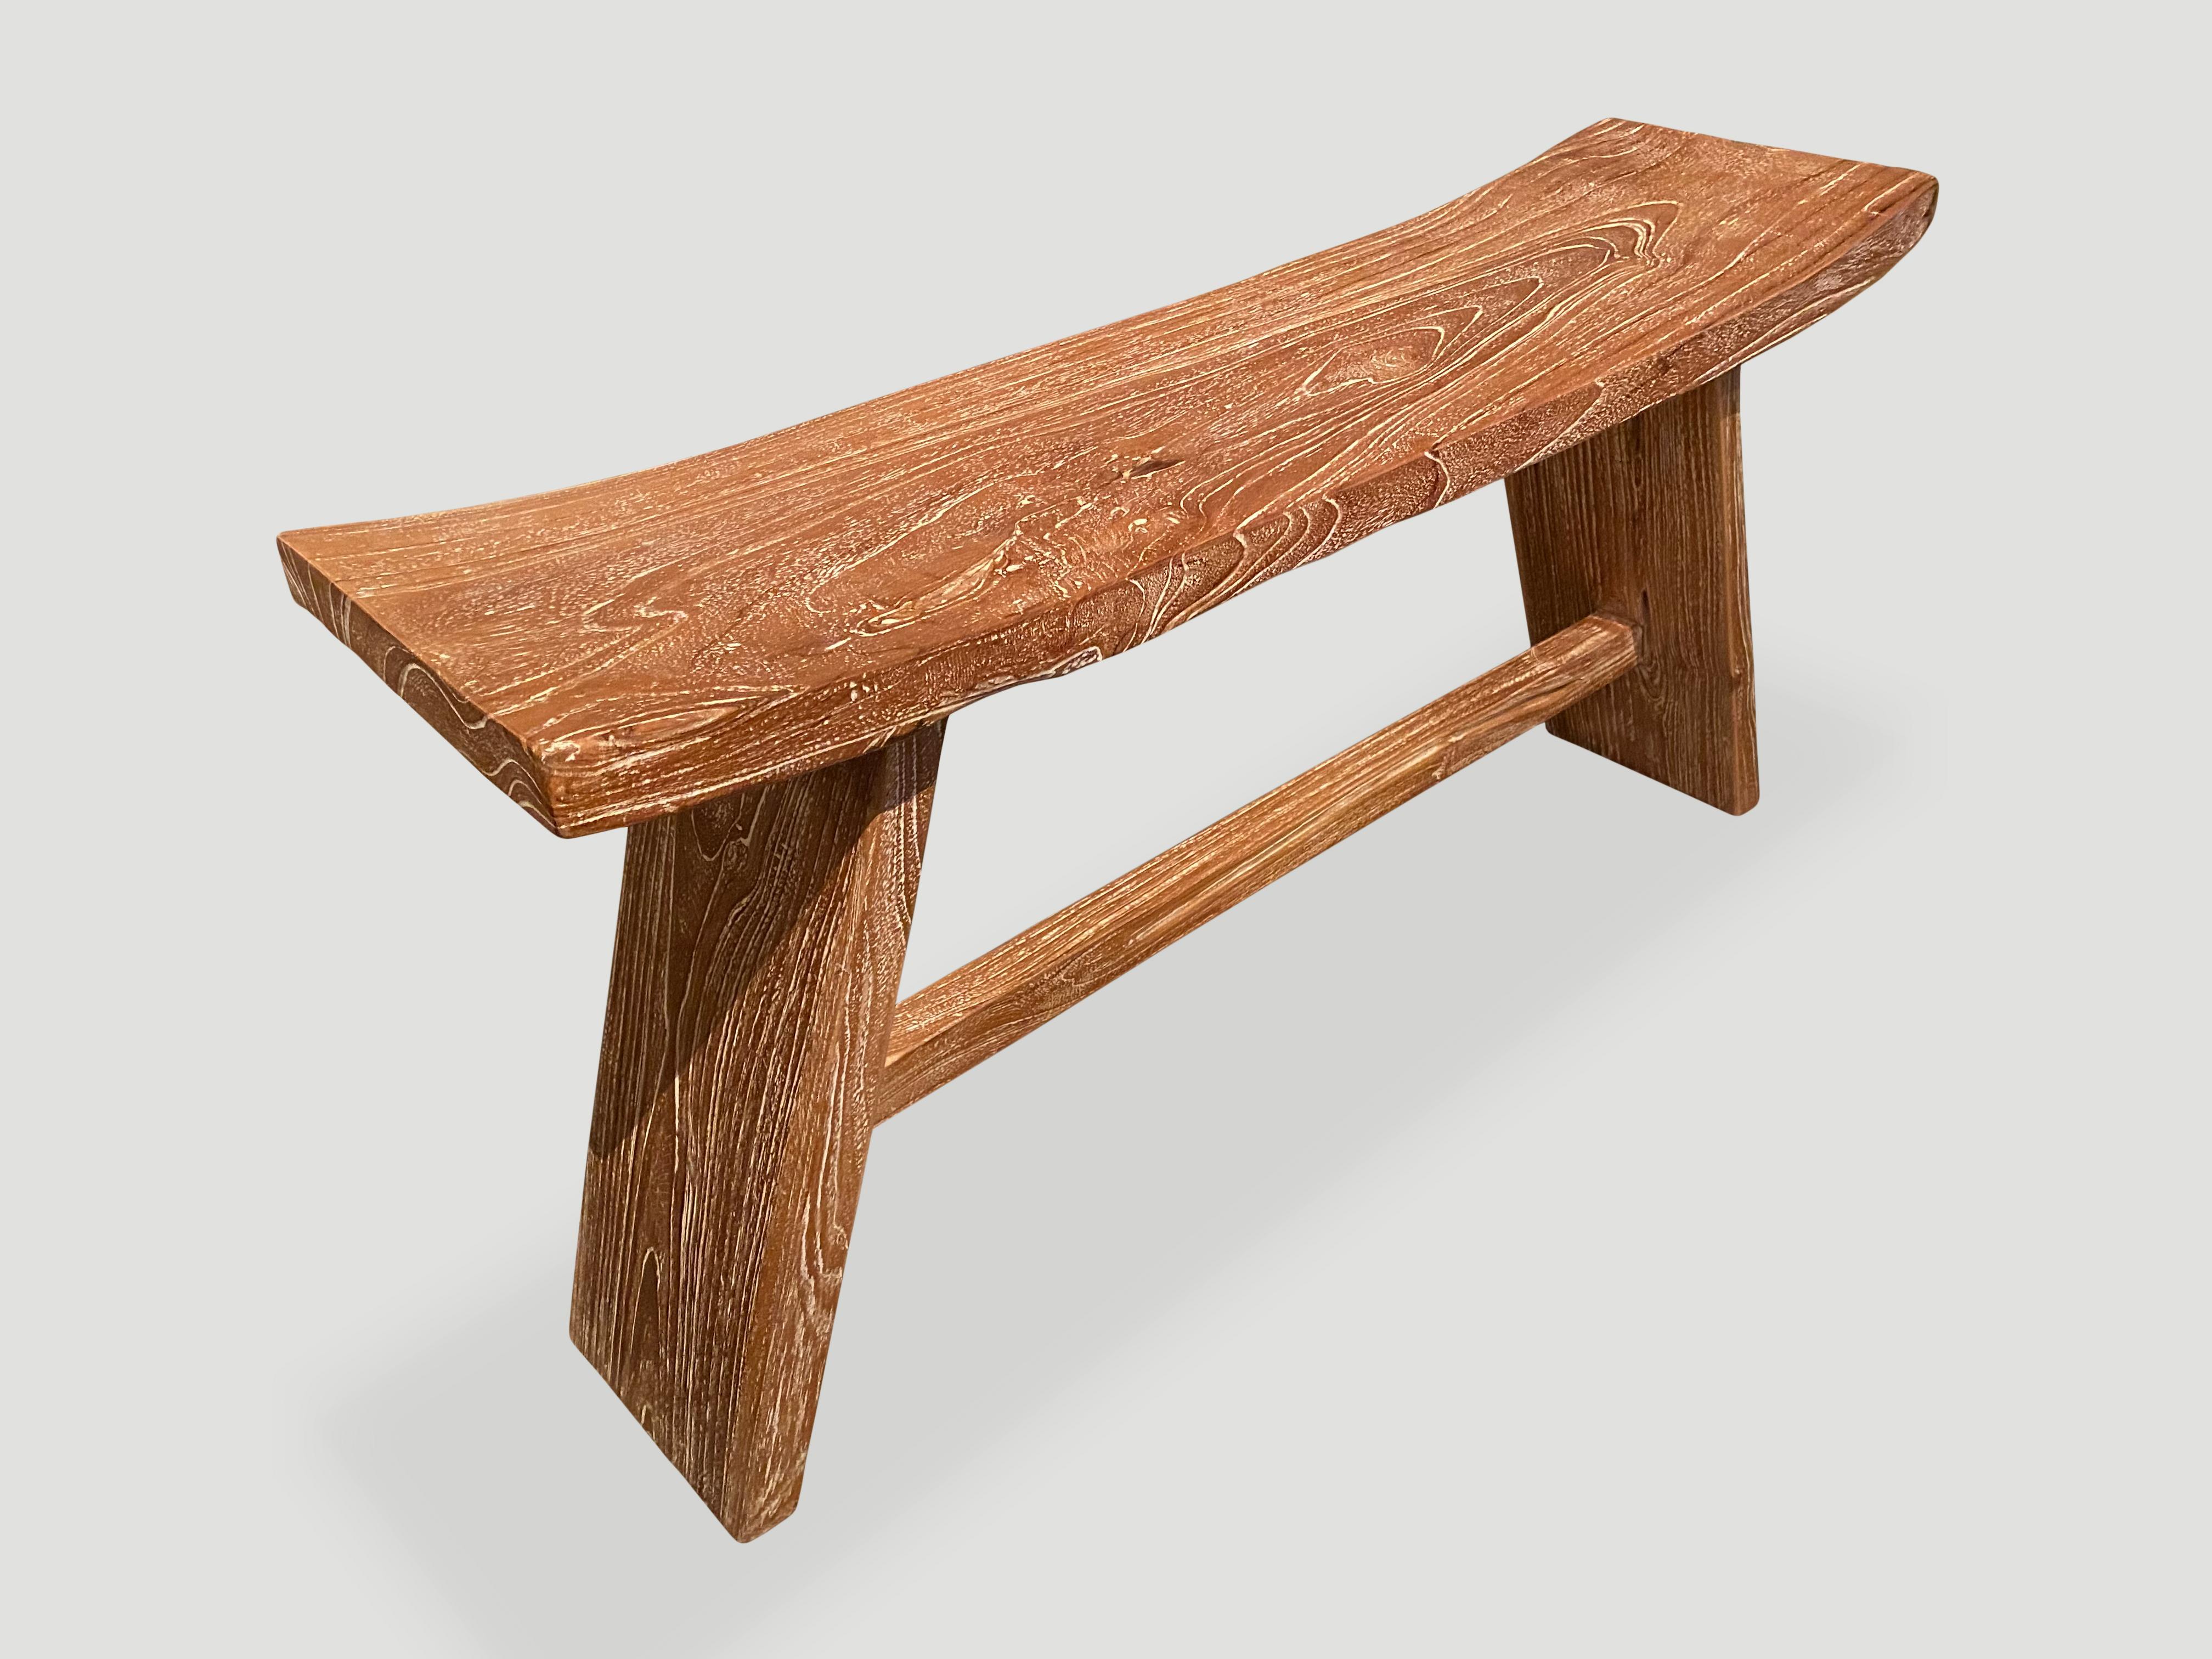 Andrianna Shamaris Minimalist Teak Wood Bench In Excellent Condition For Sale In New York, NY